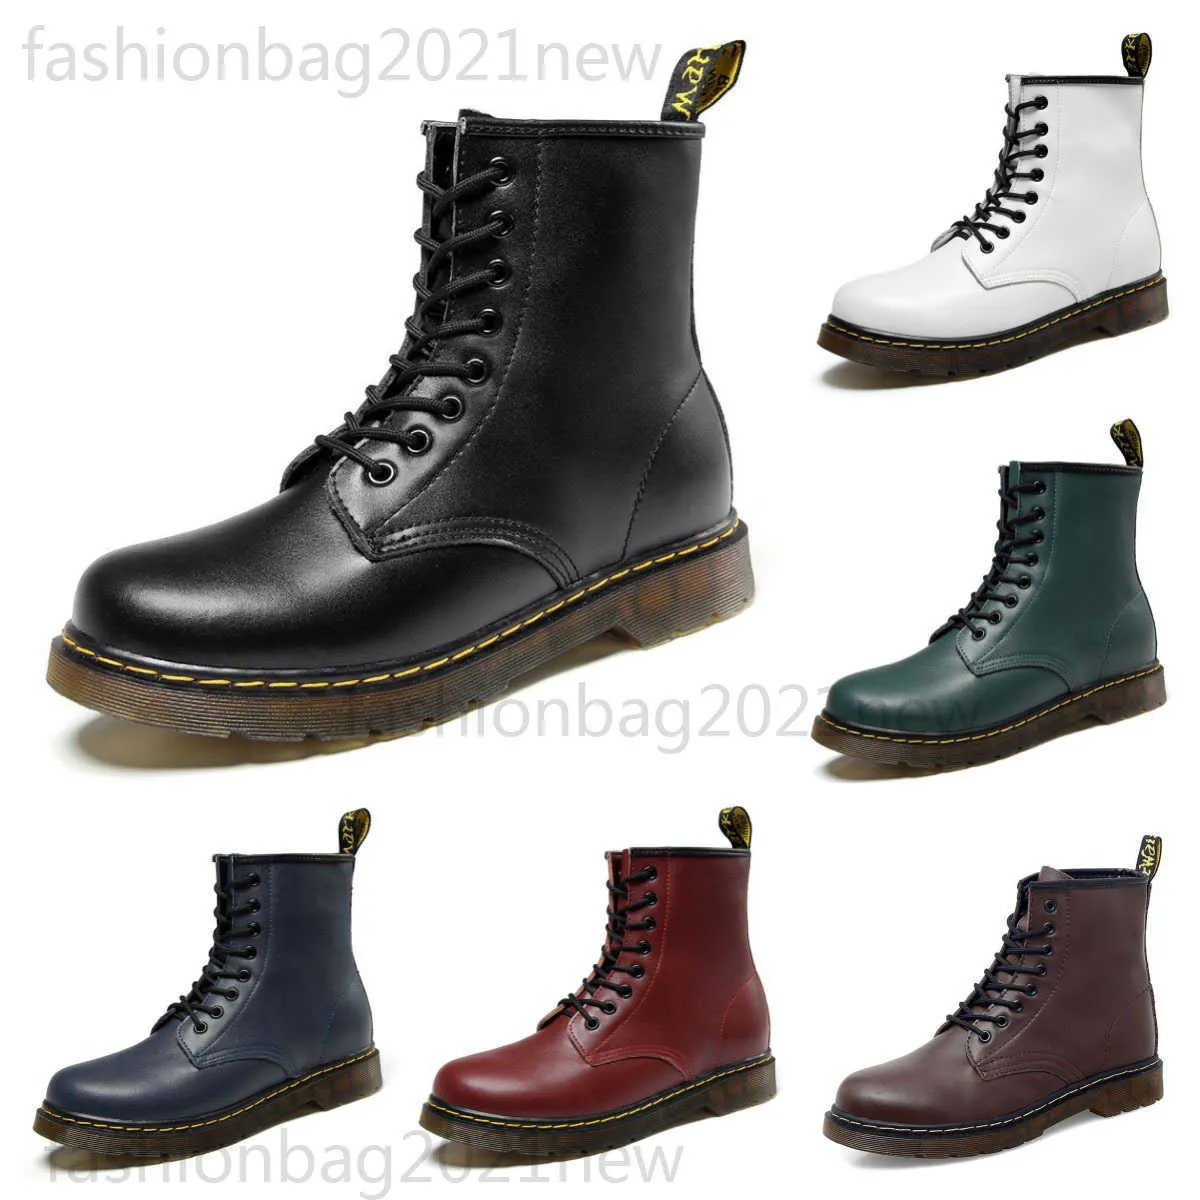 Designer fashion classic dr doc martins women boots mens High Top British Style Couples Workwear Boots casual thick-soled shoes Autumn and winter Motorcycle boots